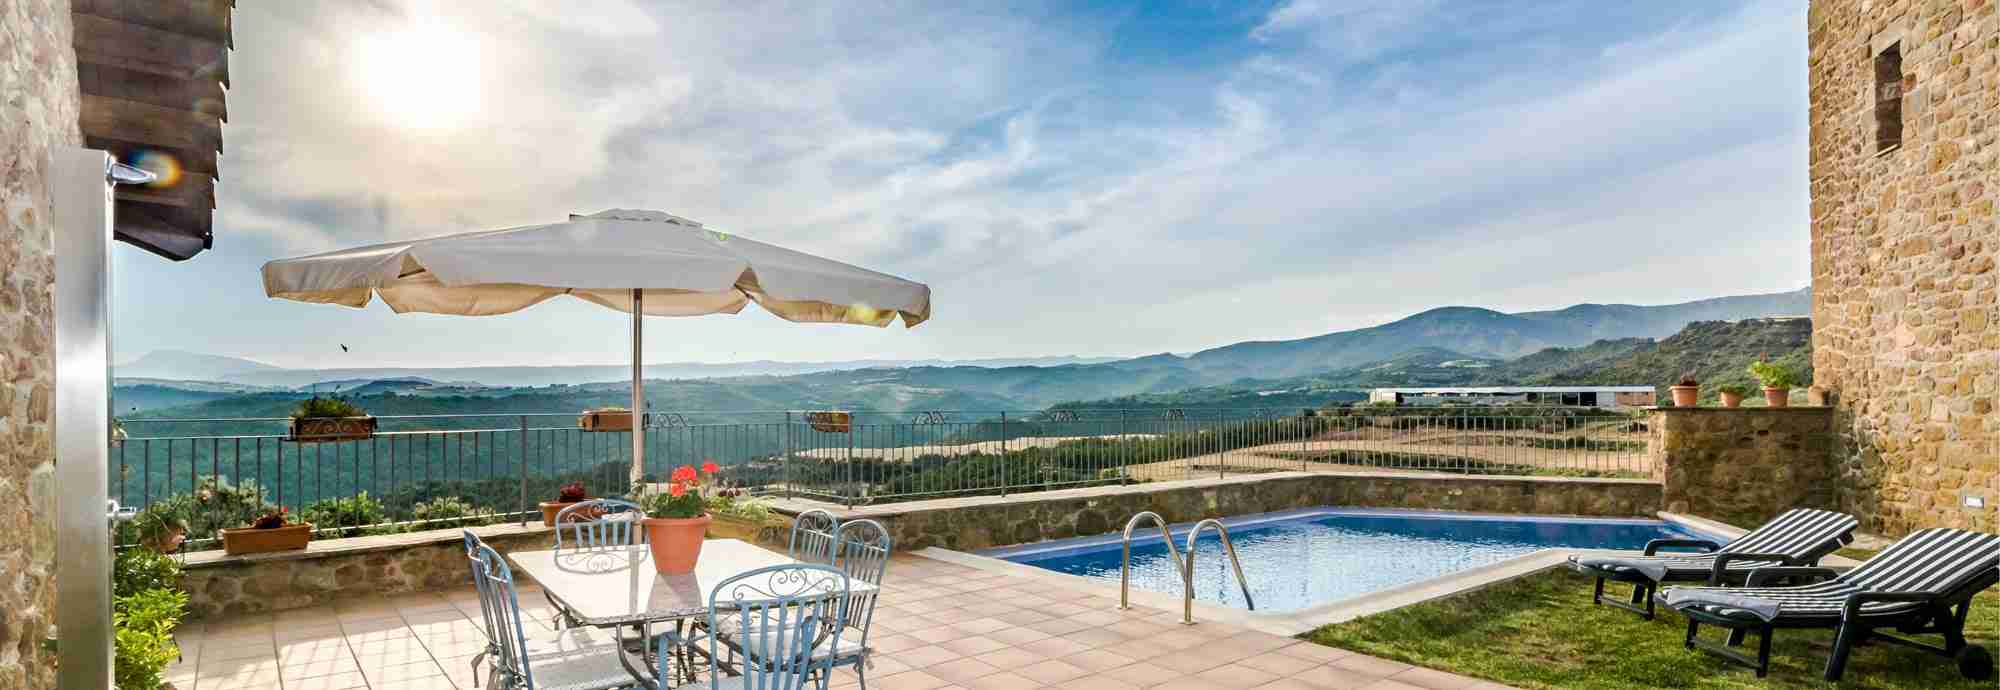 4 bed holiday cottage with stunning verandah & pool at the gateway to Pyrenees